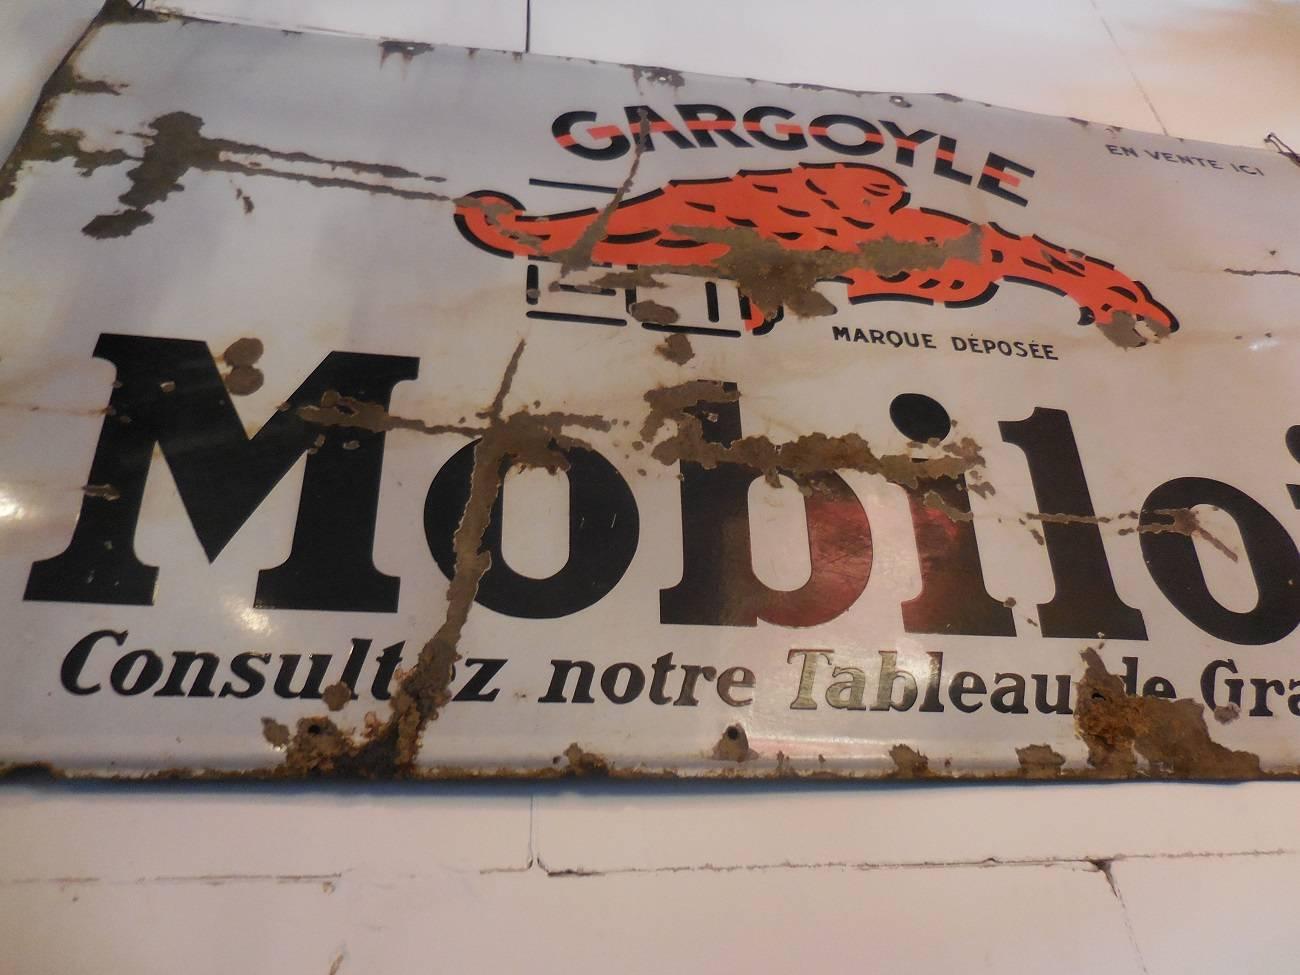 A large-sized French enamel advertising sign from 1930 of the American Company Mobil oil with the familiar gargoyle logo what’s changed in 1931 in the Pegasus, he has some damage but it’s still a very rare plate.

The dimensions are:
175 cm/68.9